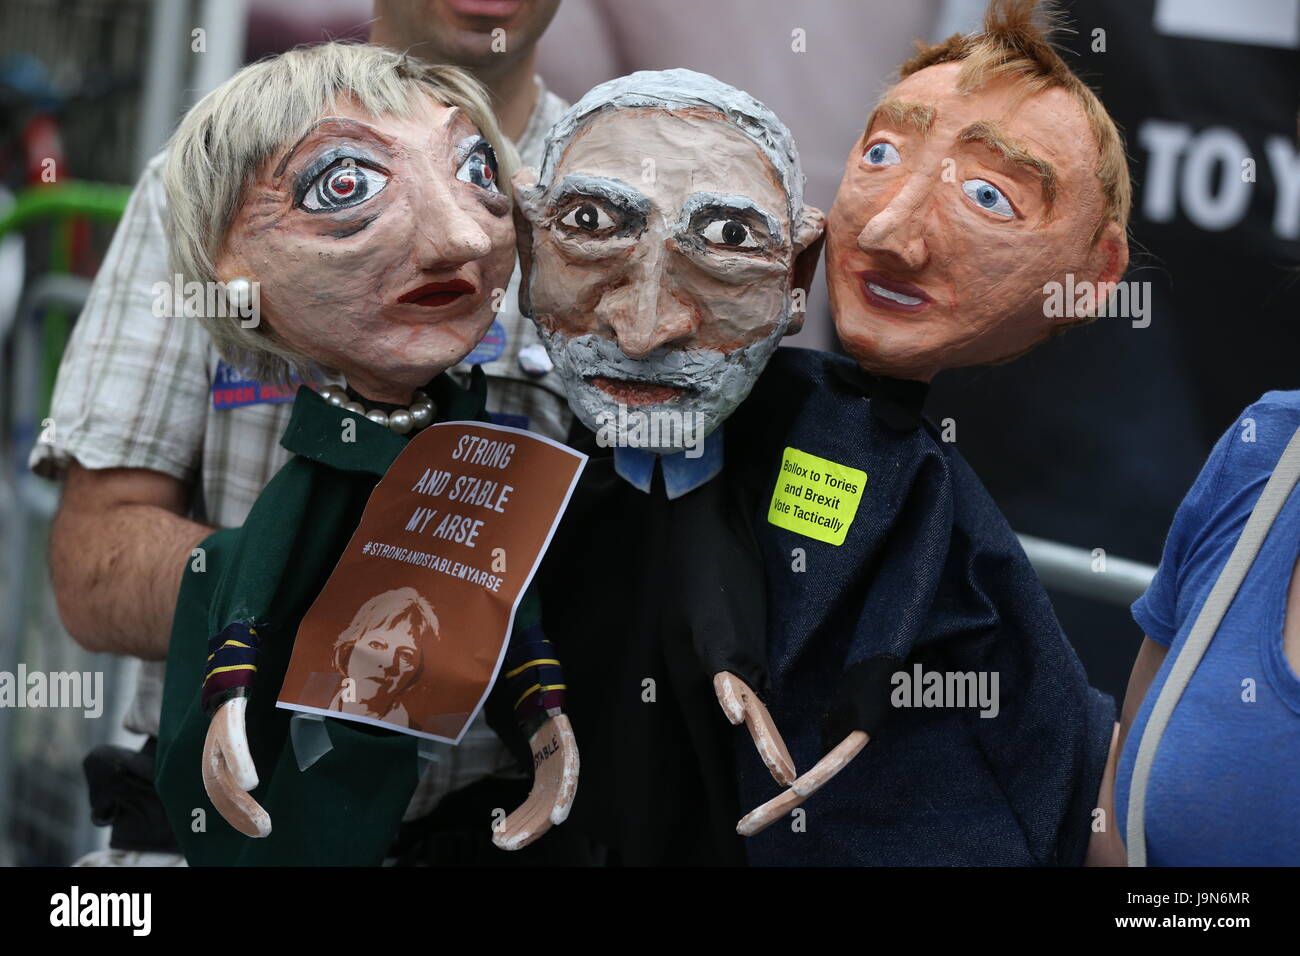 NOTE LANGUAGE ON SIGNS A demonstrator holds paper mache puppets of (left to right) Prime Minister Theresa May, Labour leader Jeremy Corbyn and Liberal Democrats leader Tim Farron outside the BBC Broadcasting House in London, where they are protesting over Radio 1's refusal to play the Liar Liar song. Stock Photo